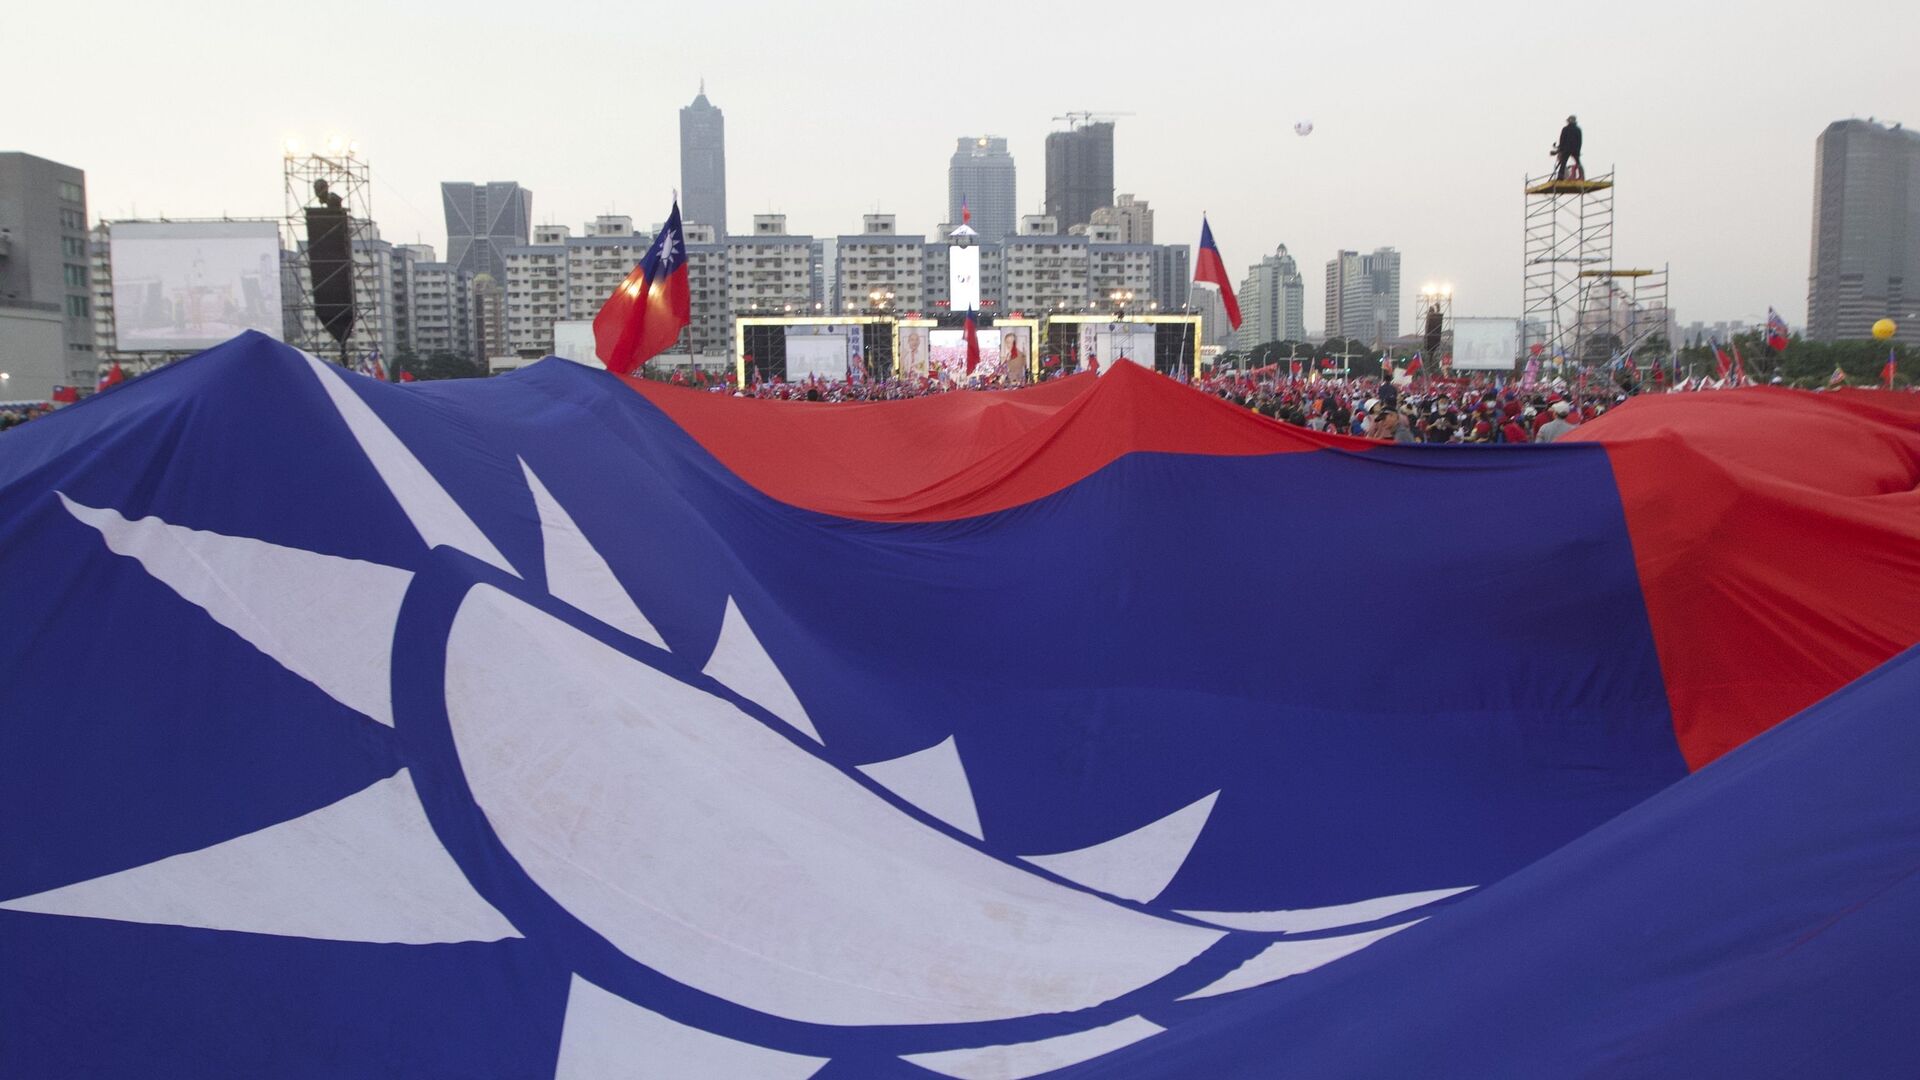 Supporters of Taiwan's 2020 presidential election candidate for the KMT, or Nationalist Party, Han Kuo-yu pass along a giant Taiwanese flag for the start of a campaign rally in southern Taiwan's Kaohsiung city on Friday, Jan 10, 2020 - Sputnik International, 1920, 10.06.2022